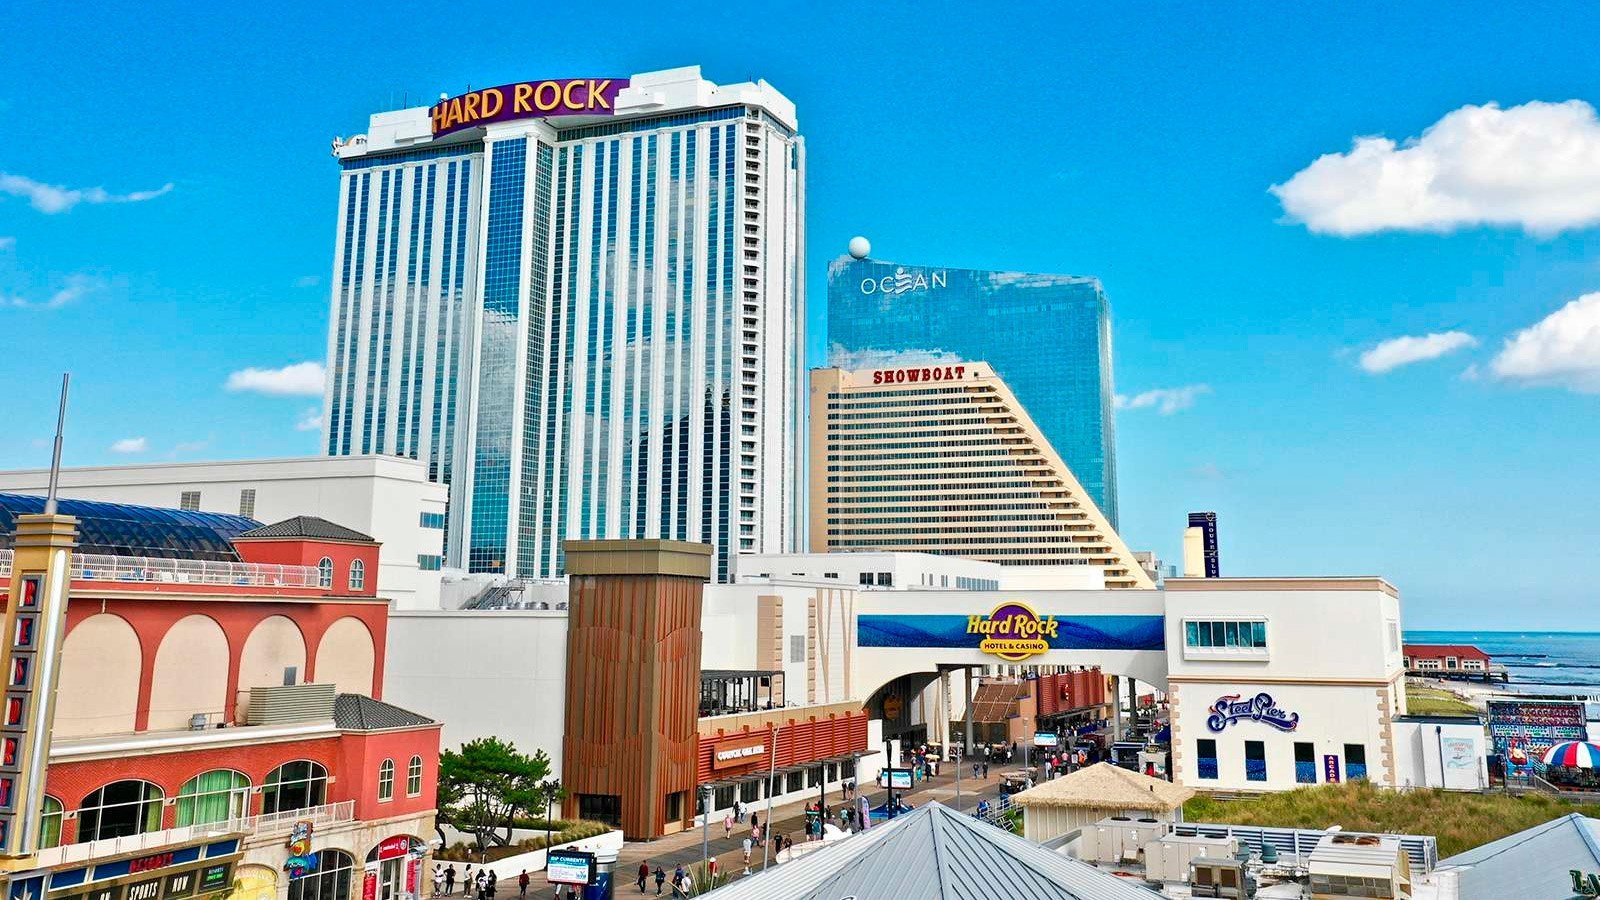 Judge grants 90-day stay on decision striking down law that gave Atlantic City casinos millions in tax breaks